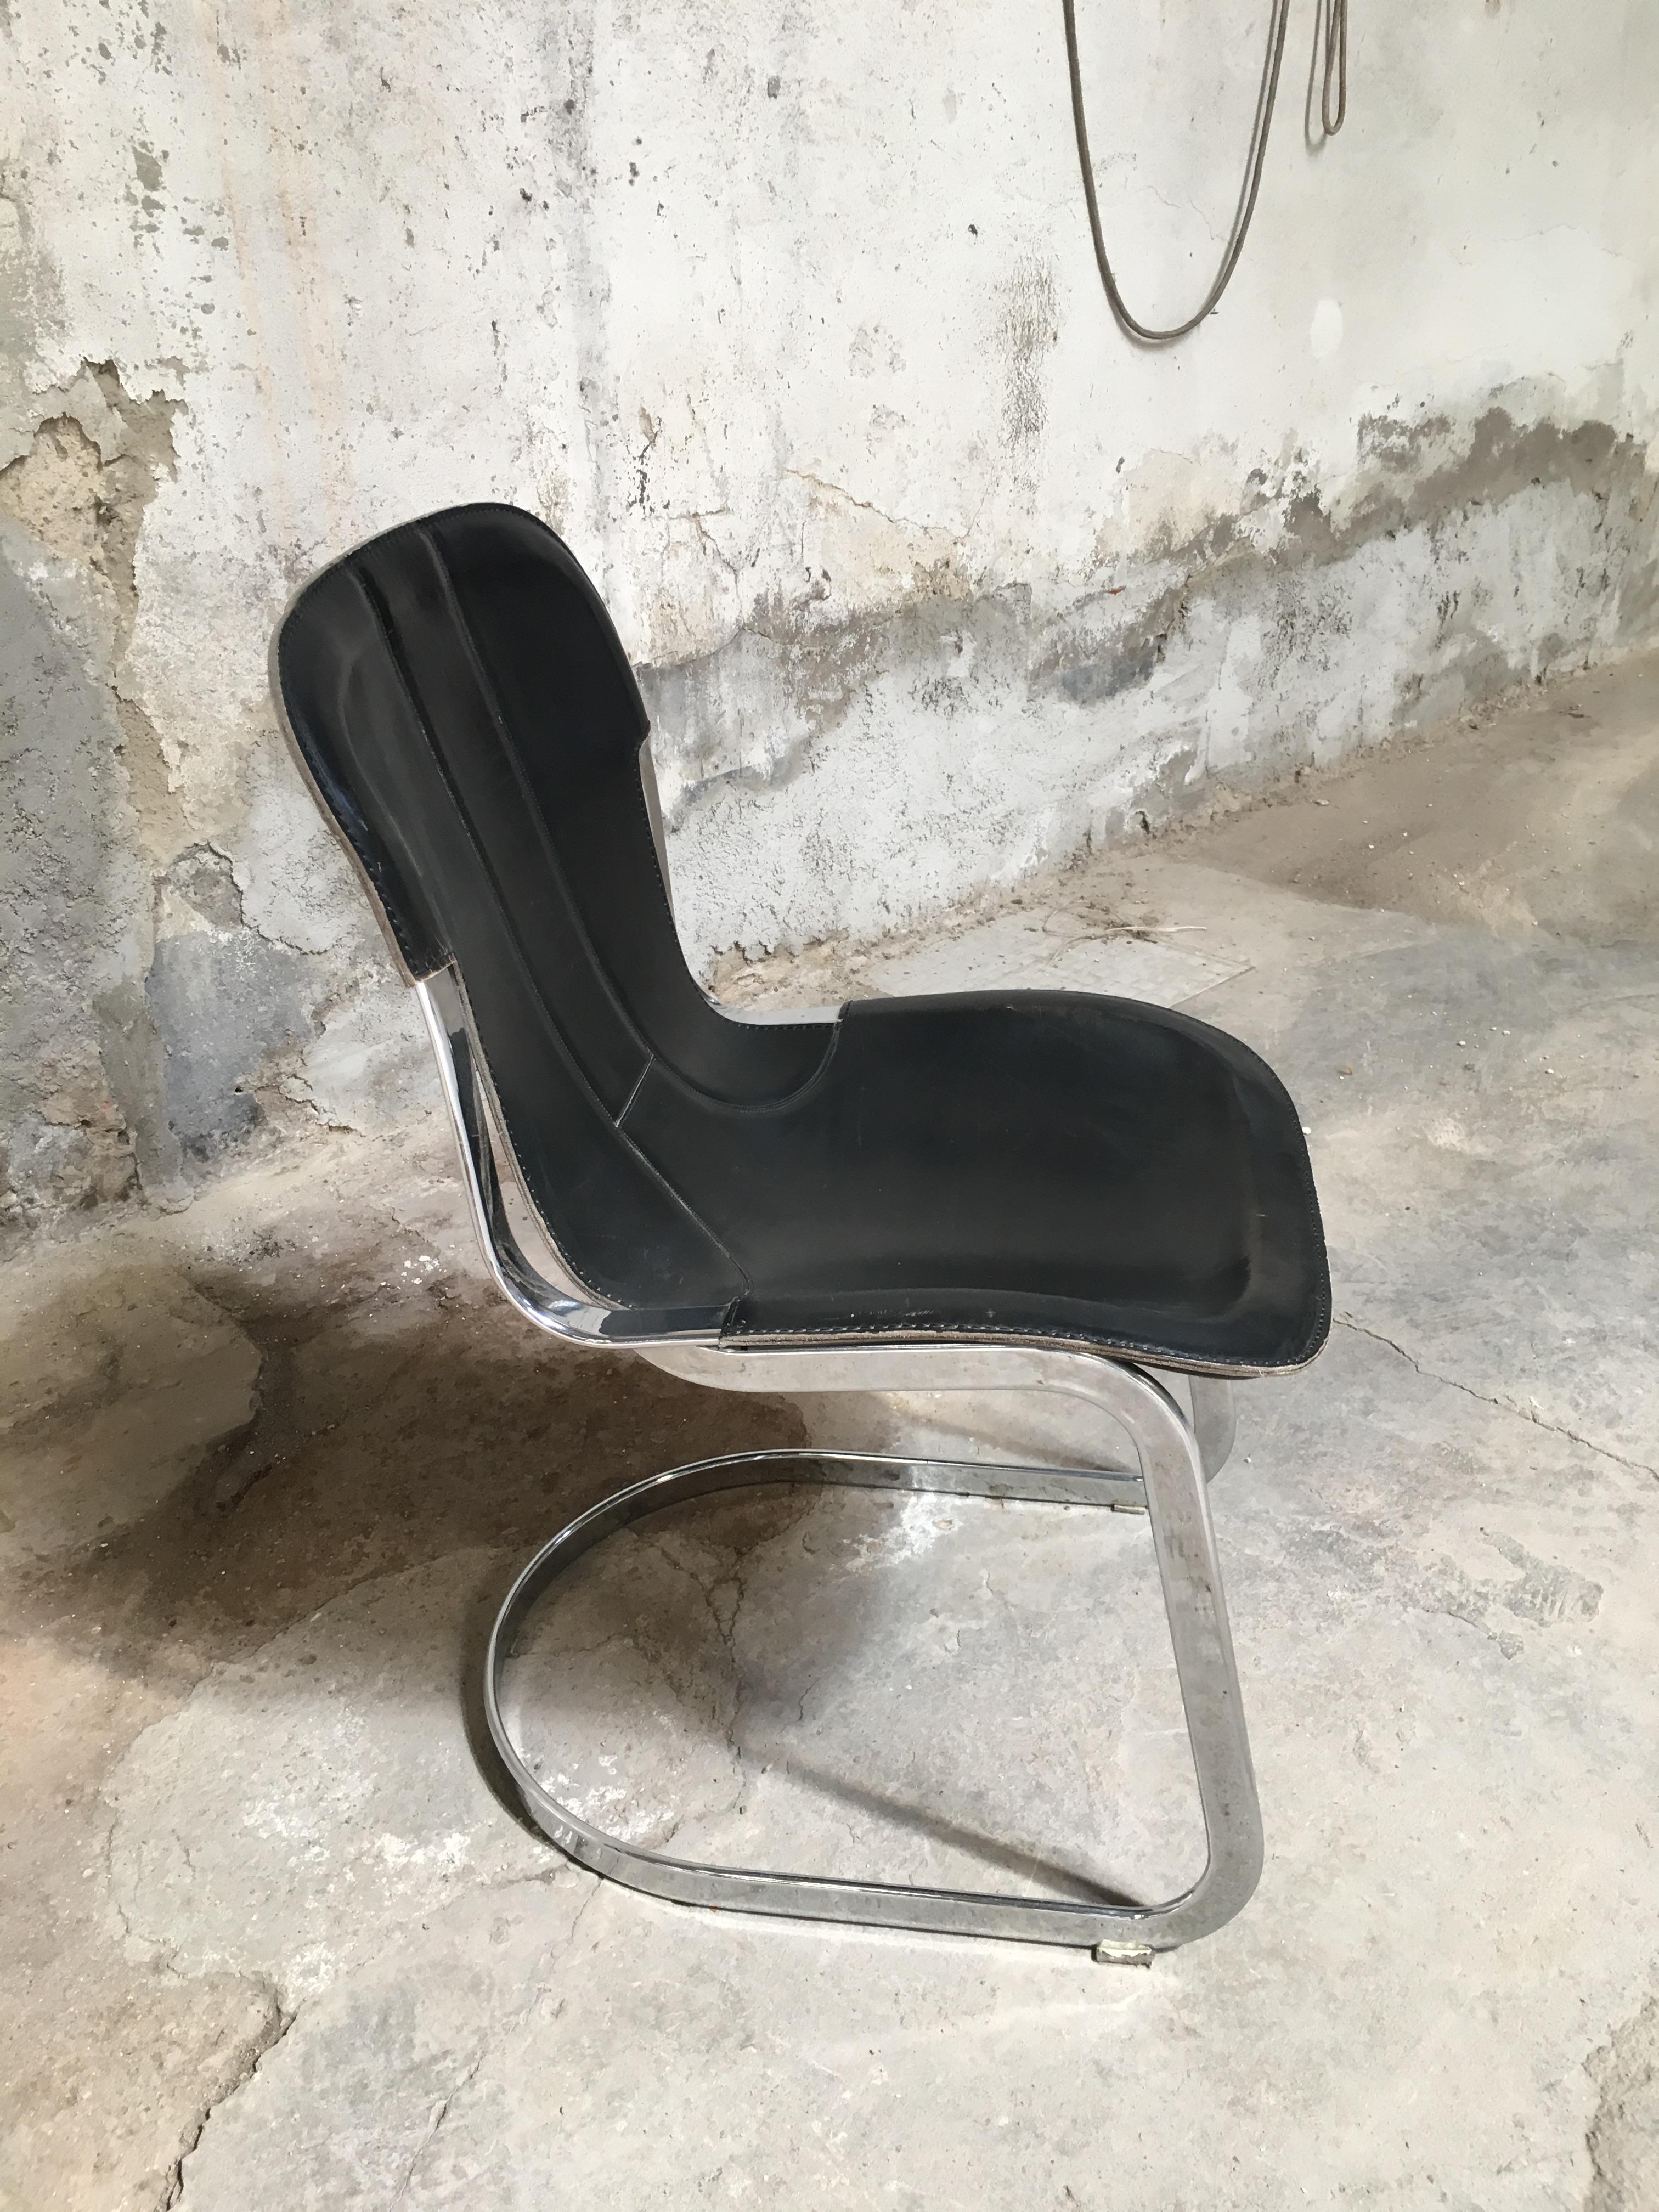 Four Italian Chairs with Original Black Leather Seat by Willy Rizzo for Cidue 8